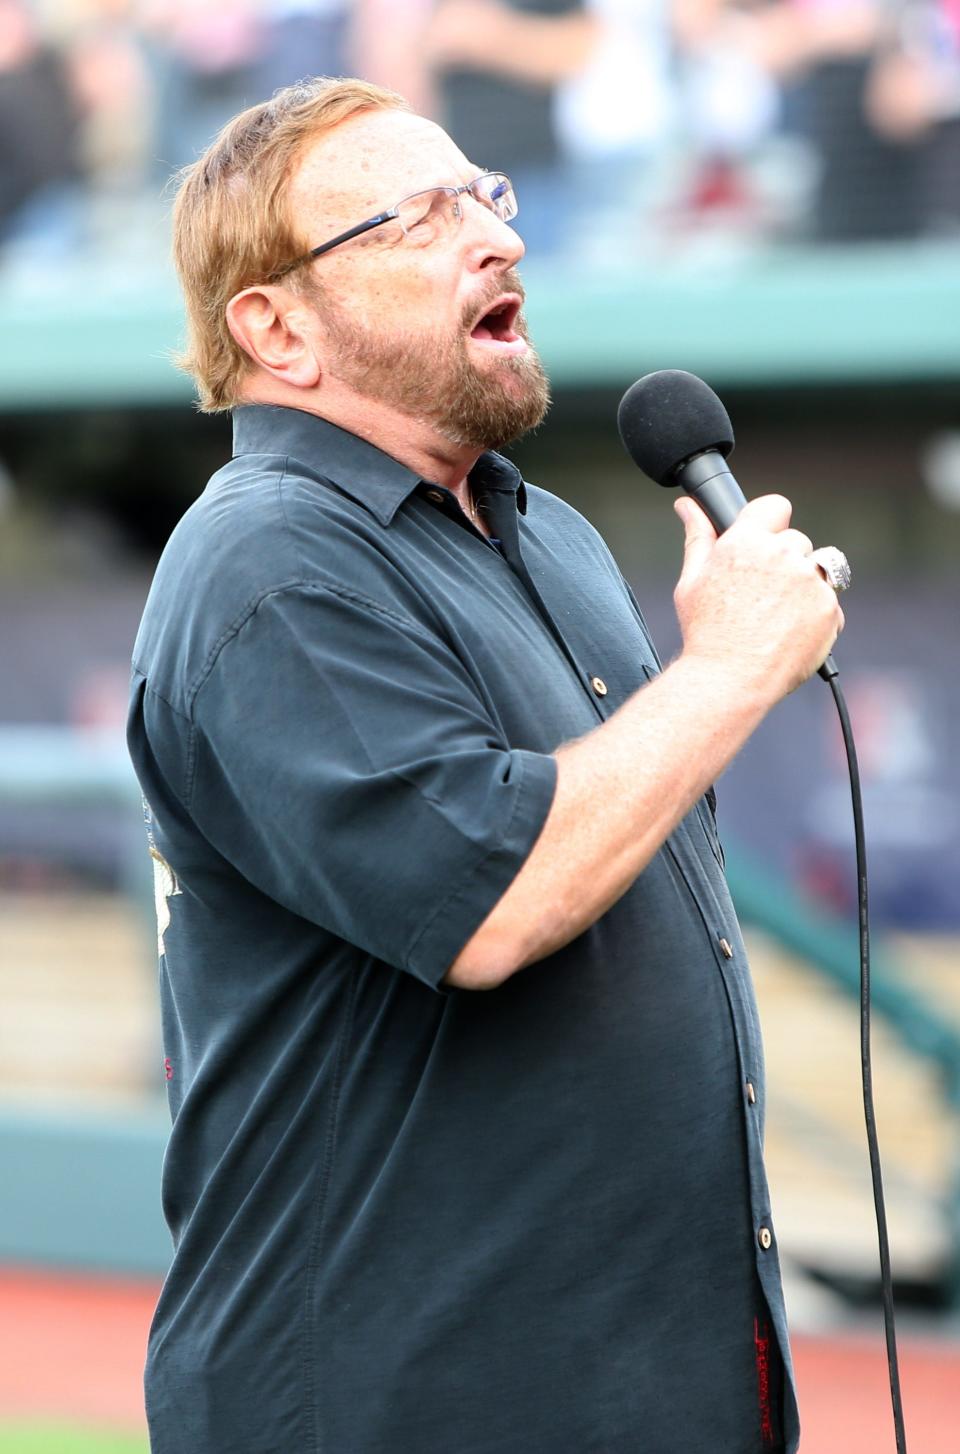 Wayne Messmer sings the National Anthem Tuesday, April 11, 2023, at Four Winds Field for the 2023 season home opening baseball game against Beloit.